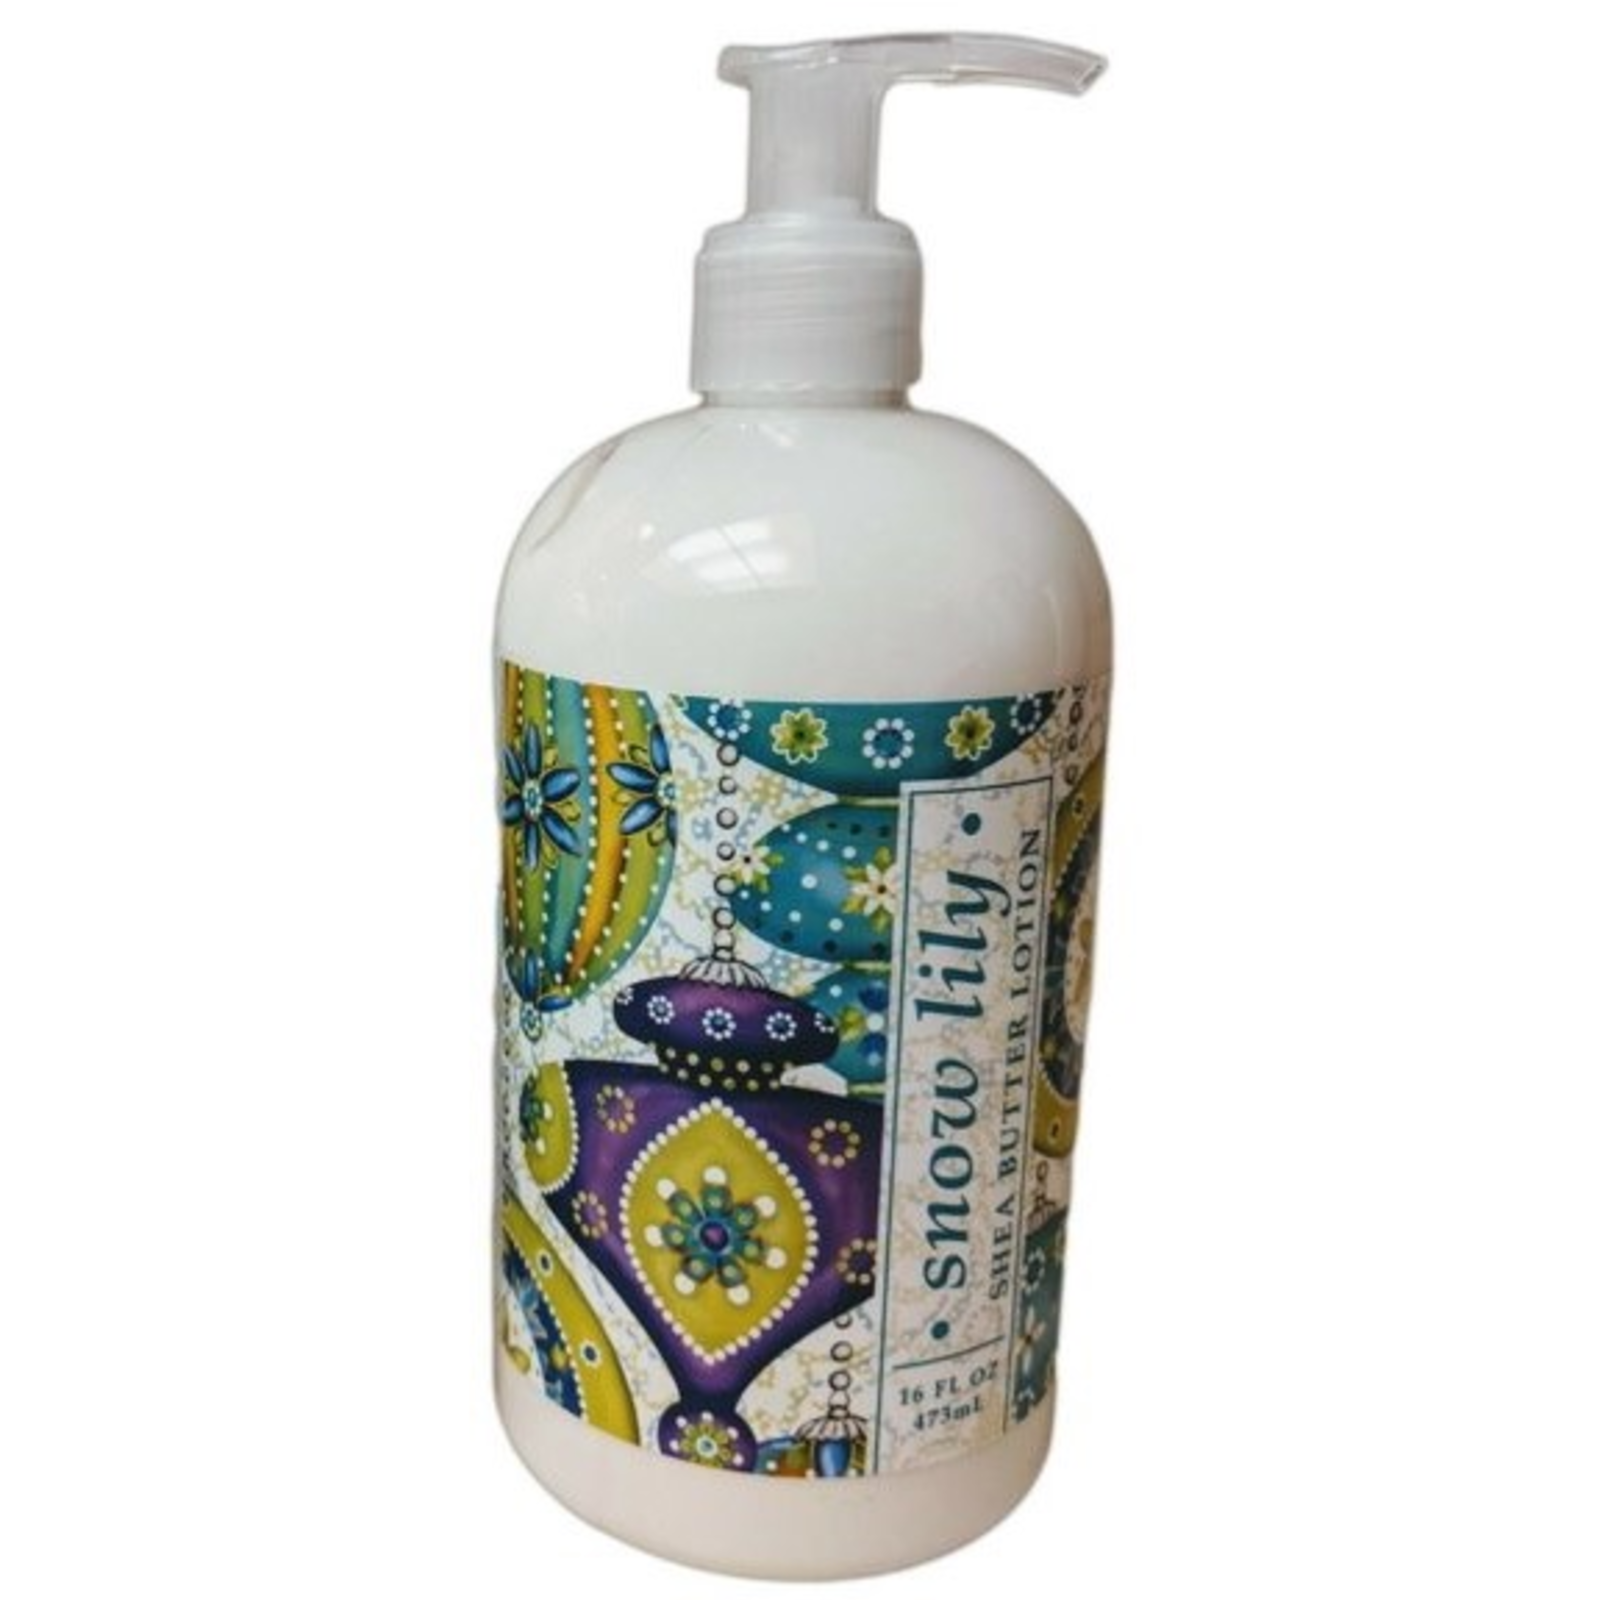 Greenwich Bay Trading Company Snow Lily Hand Lotion loading=